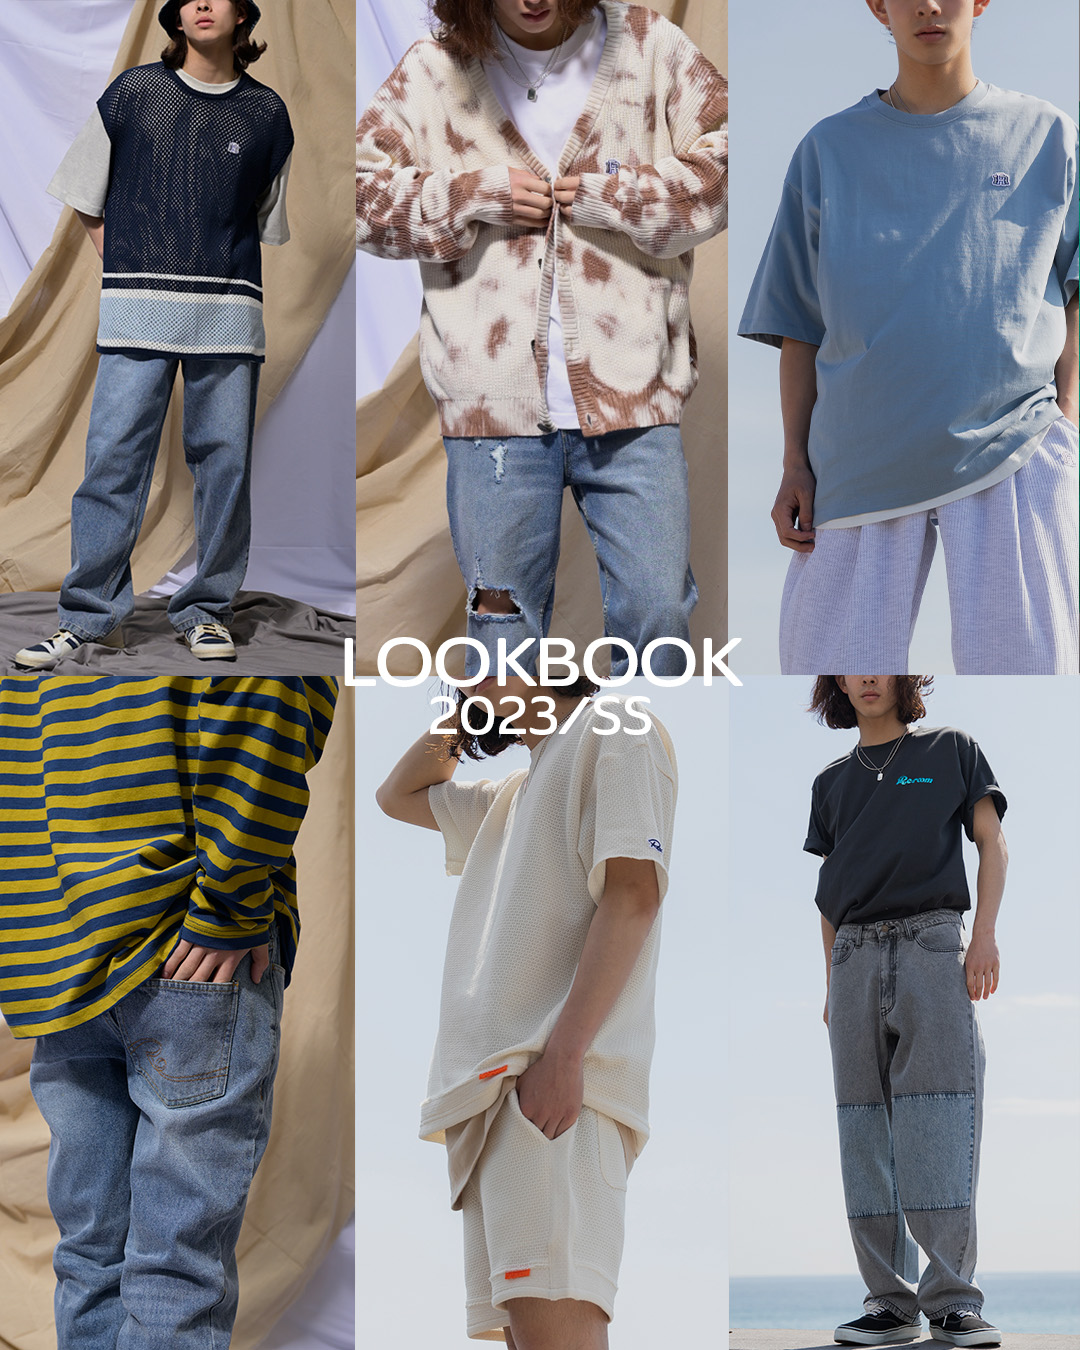 LOOK BOOK 2023/SS